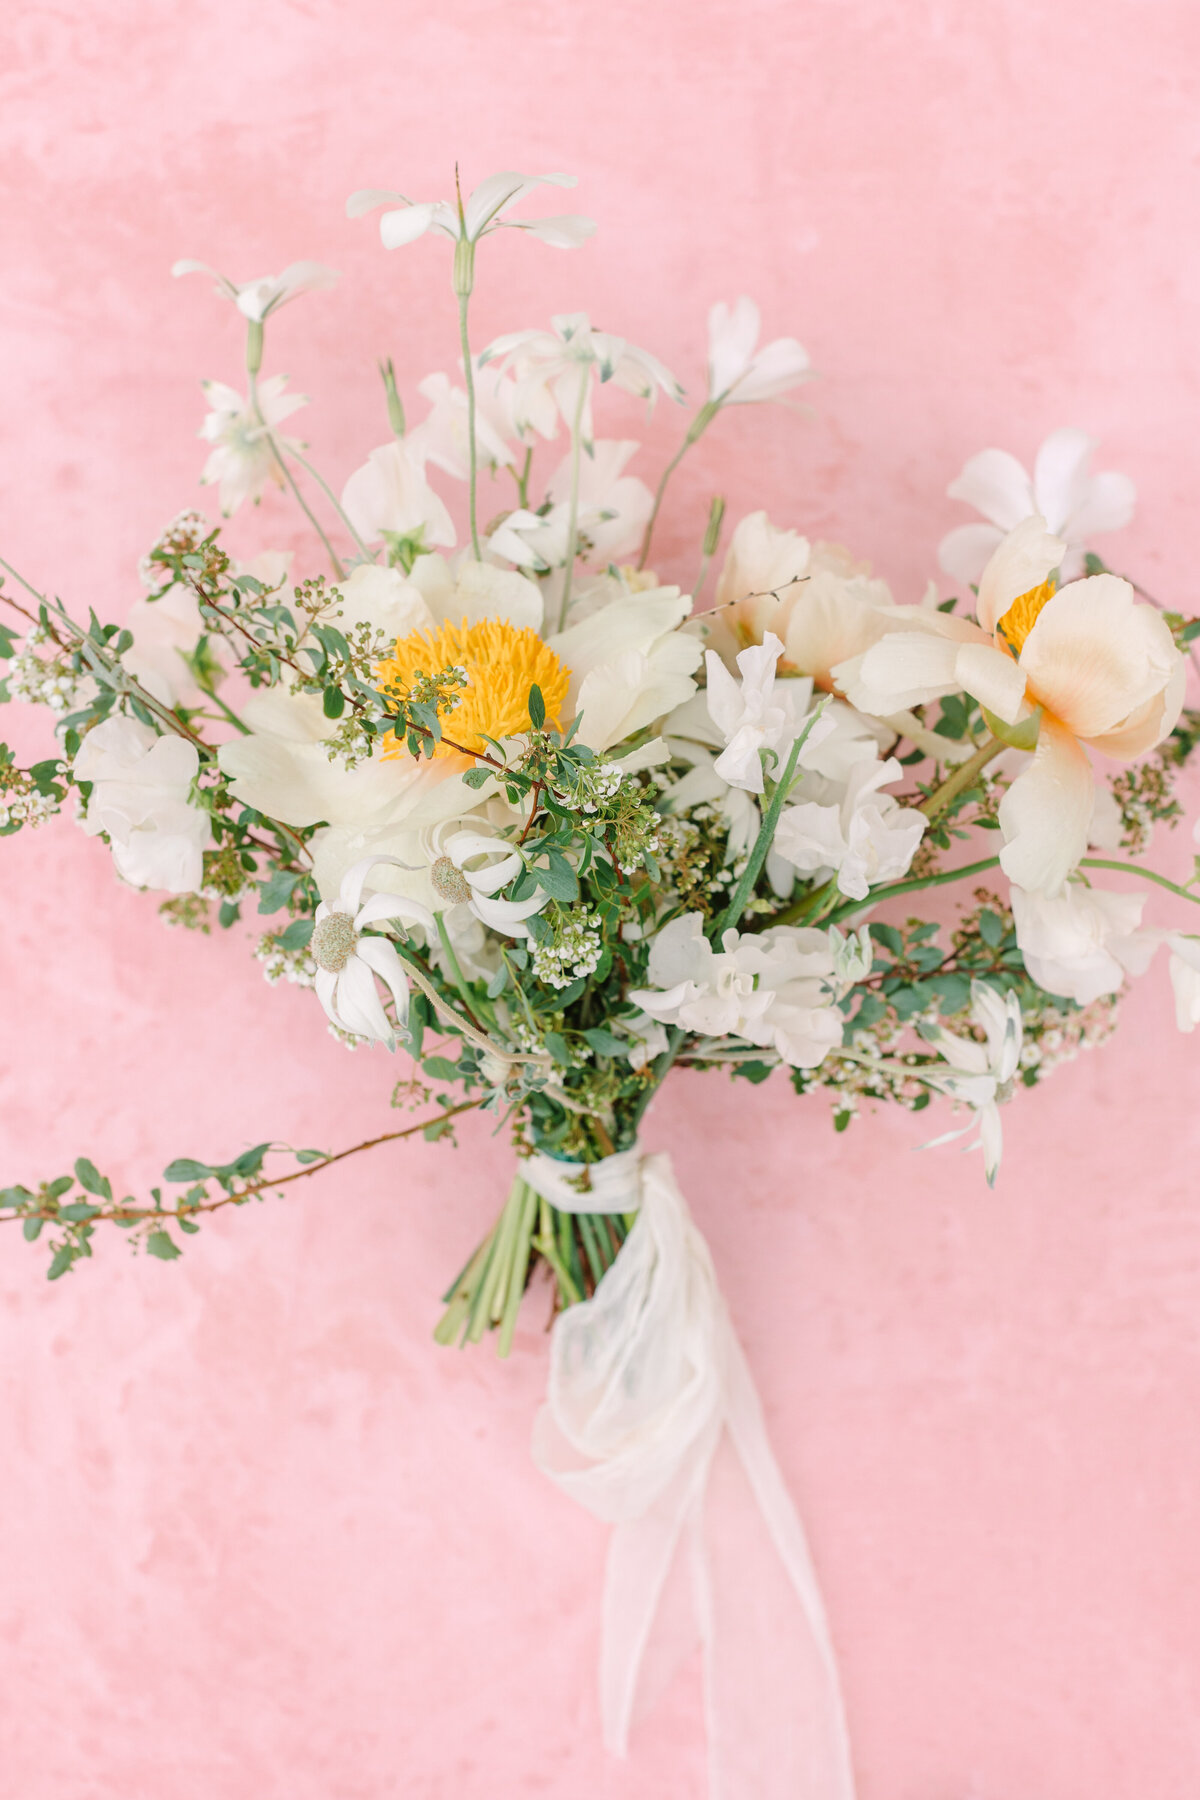 white and orange bridal bouquet with loose greenery on pink backdrop.